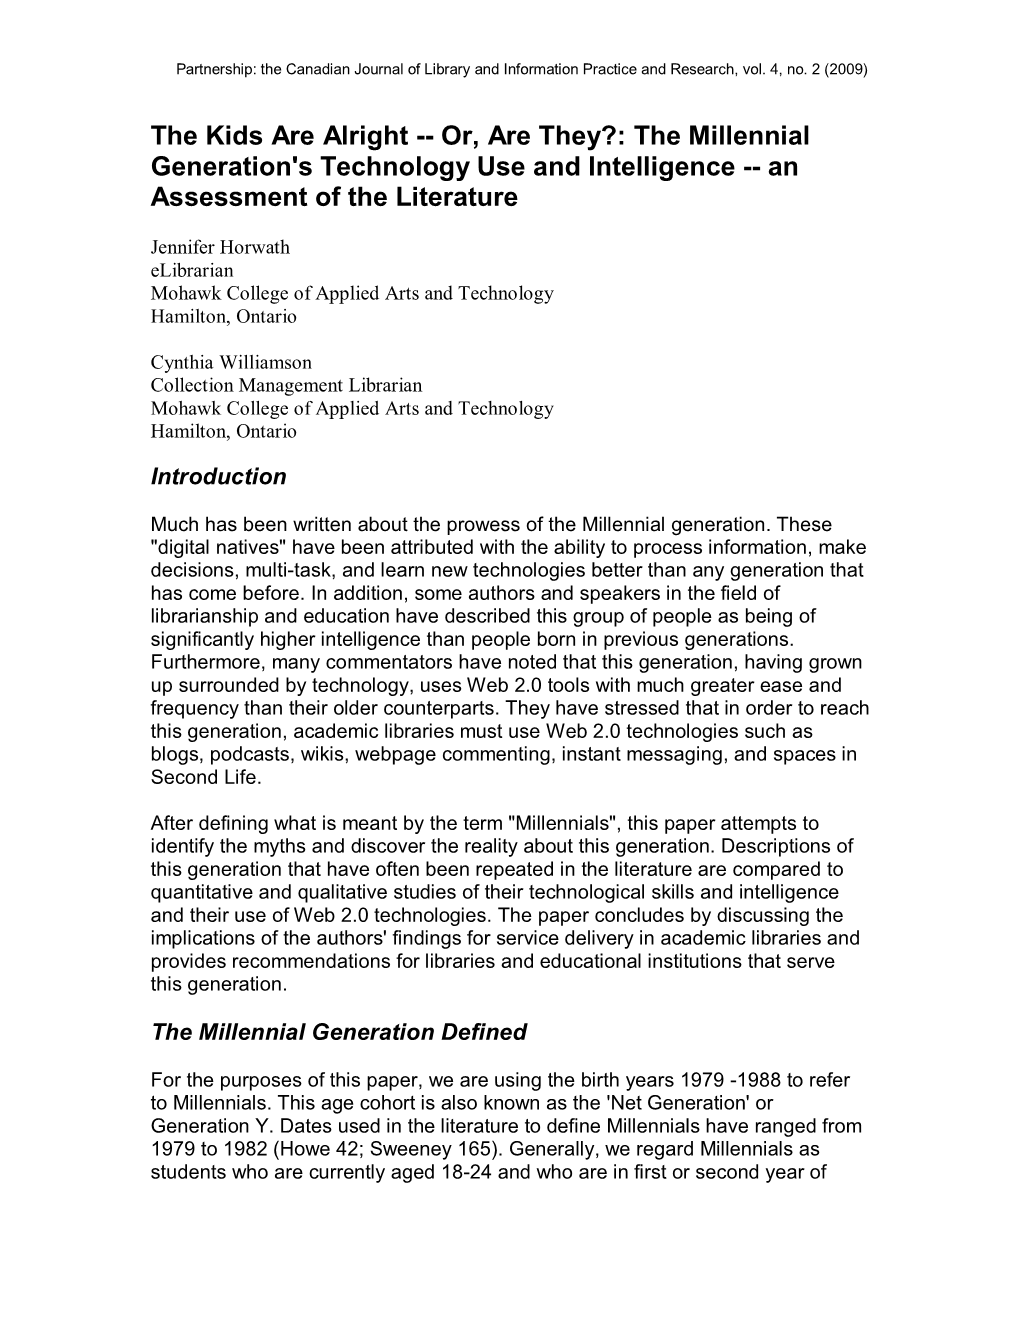 The Millennial Generation's Technology Use and Intelligence -- an Assessment of the Literature